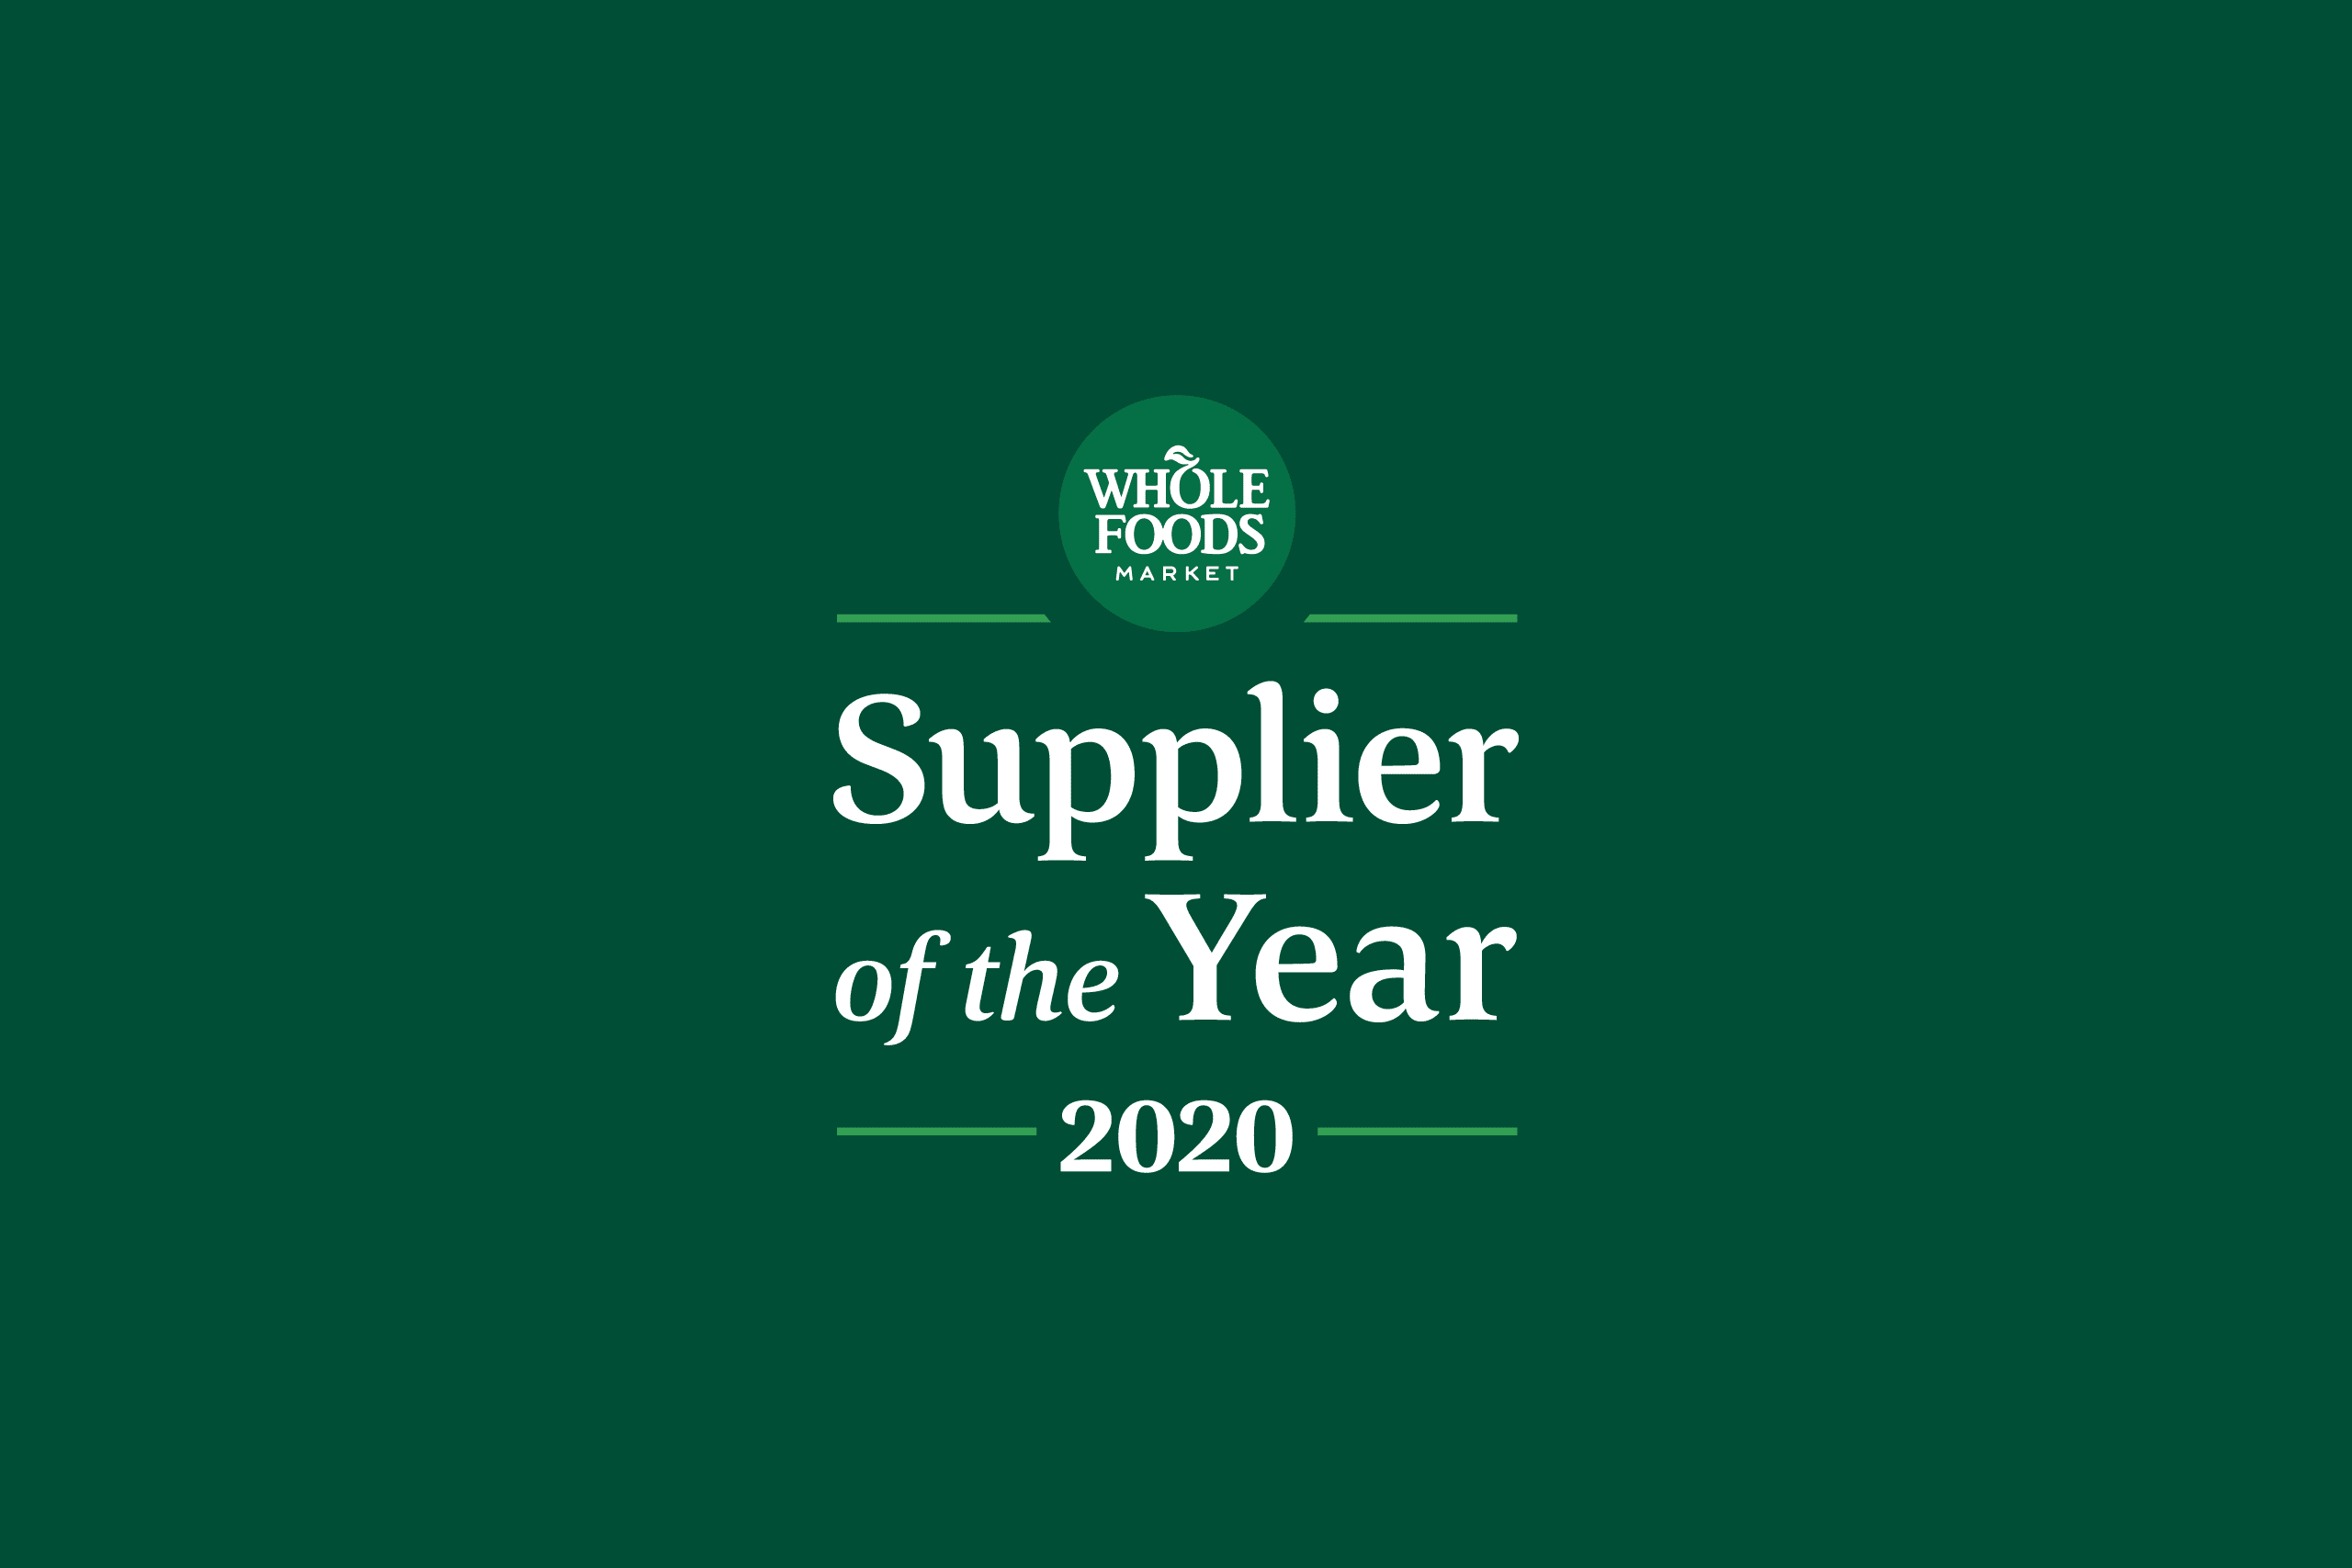 Taylor Farms recognized with Supplier of the Year for Service and Partnership from Whole Foods Market Featured Image